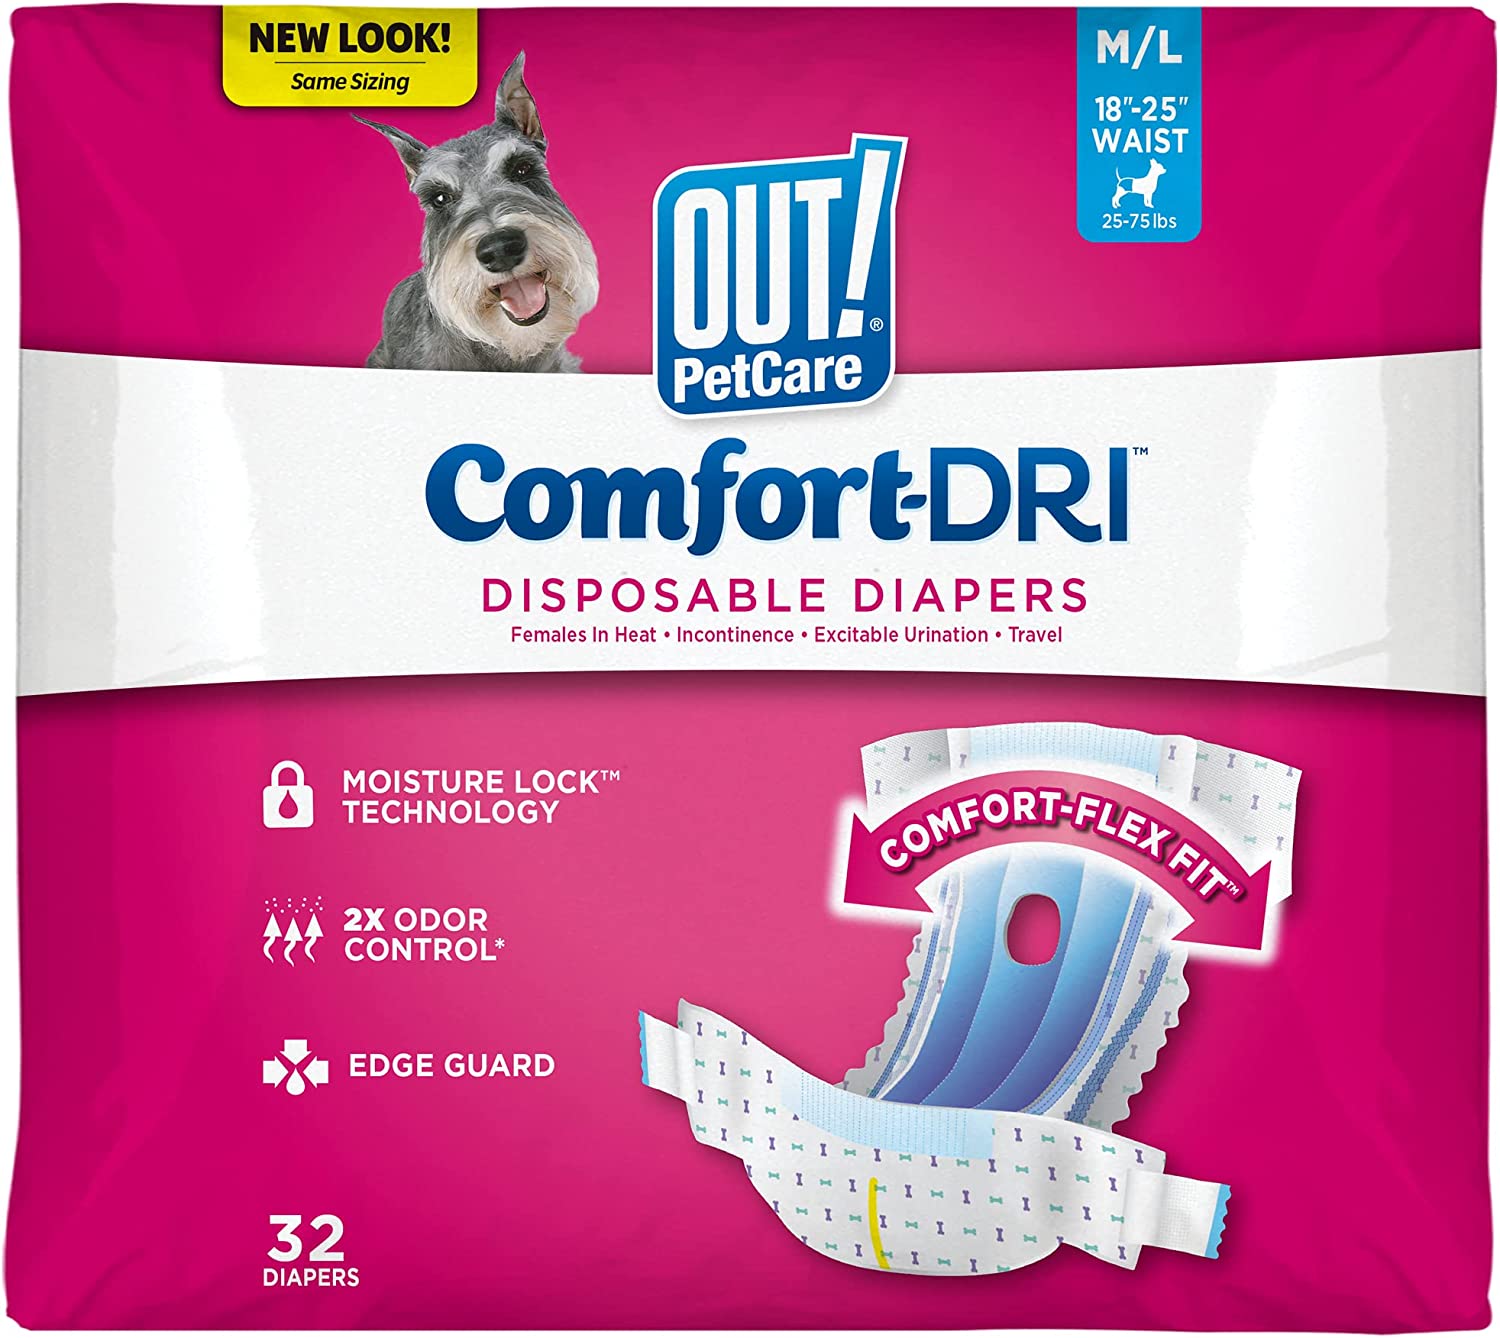 6. OUT! Absorbent Female Diapers